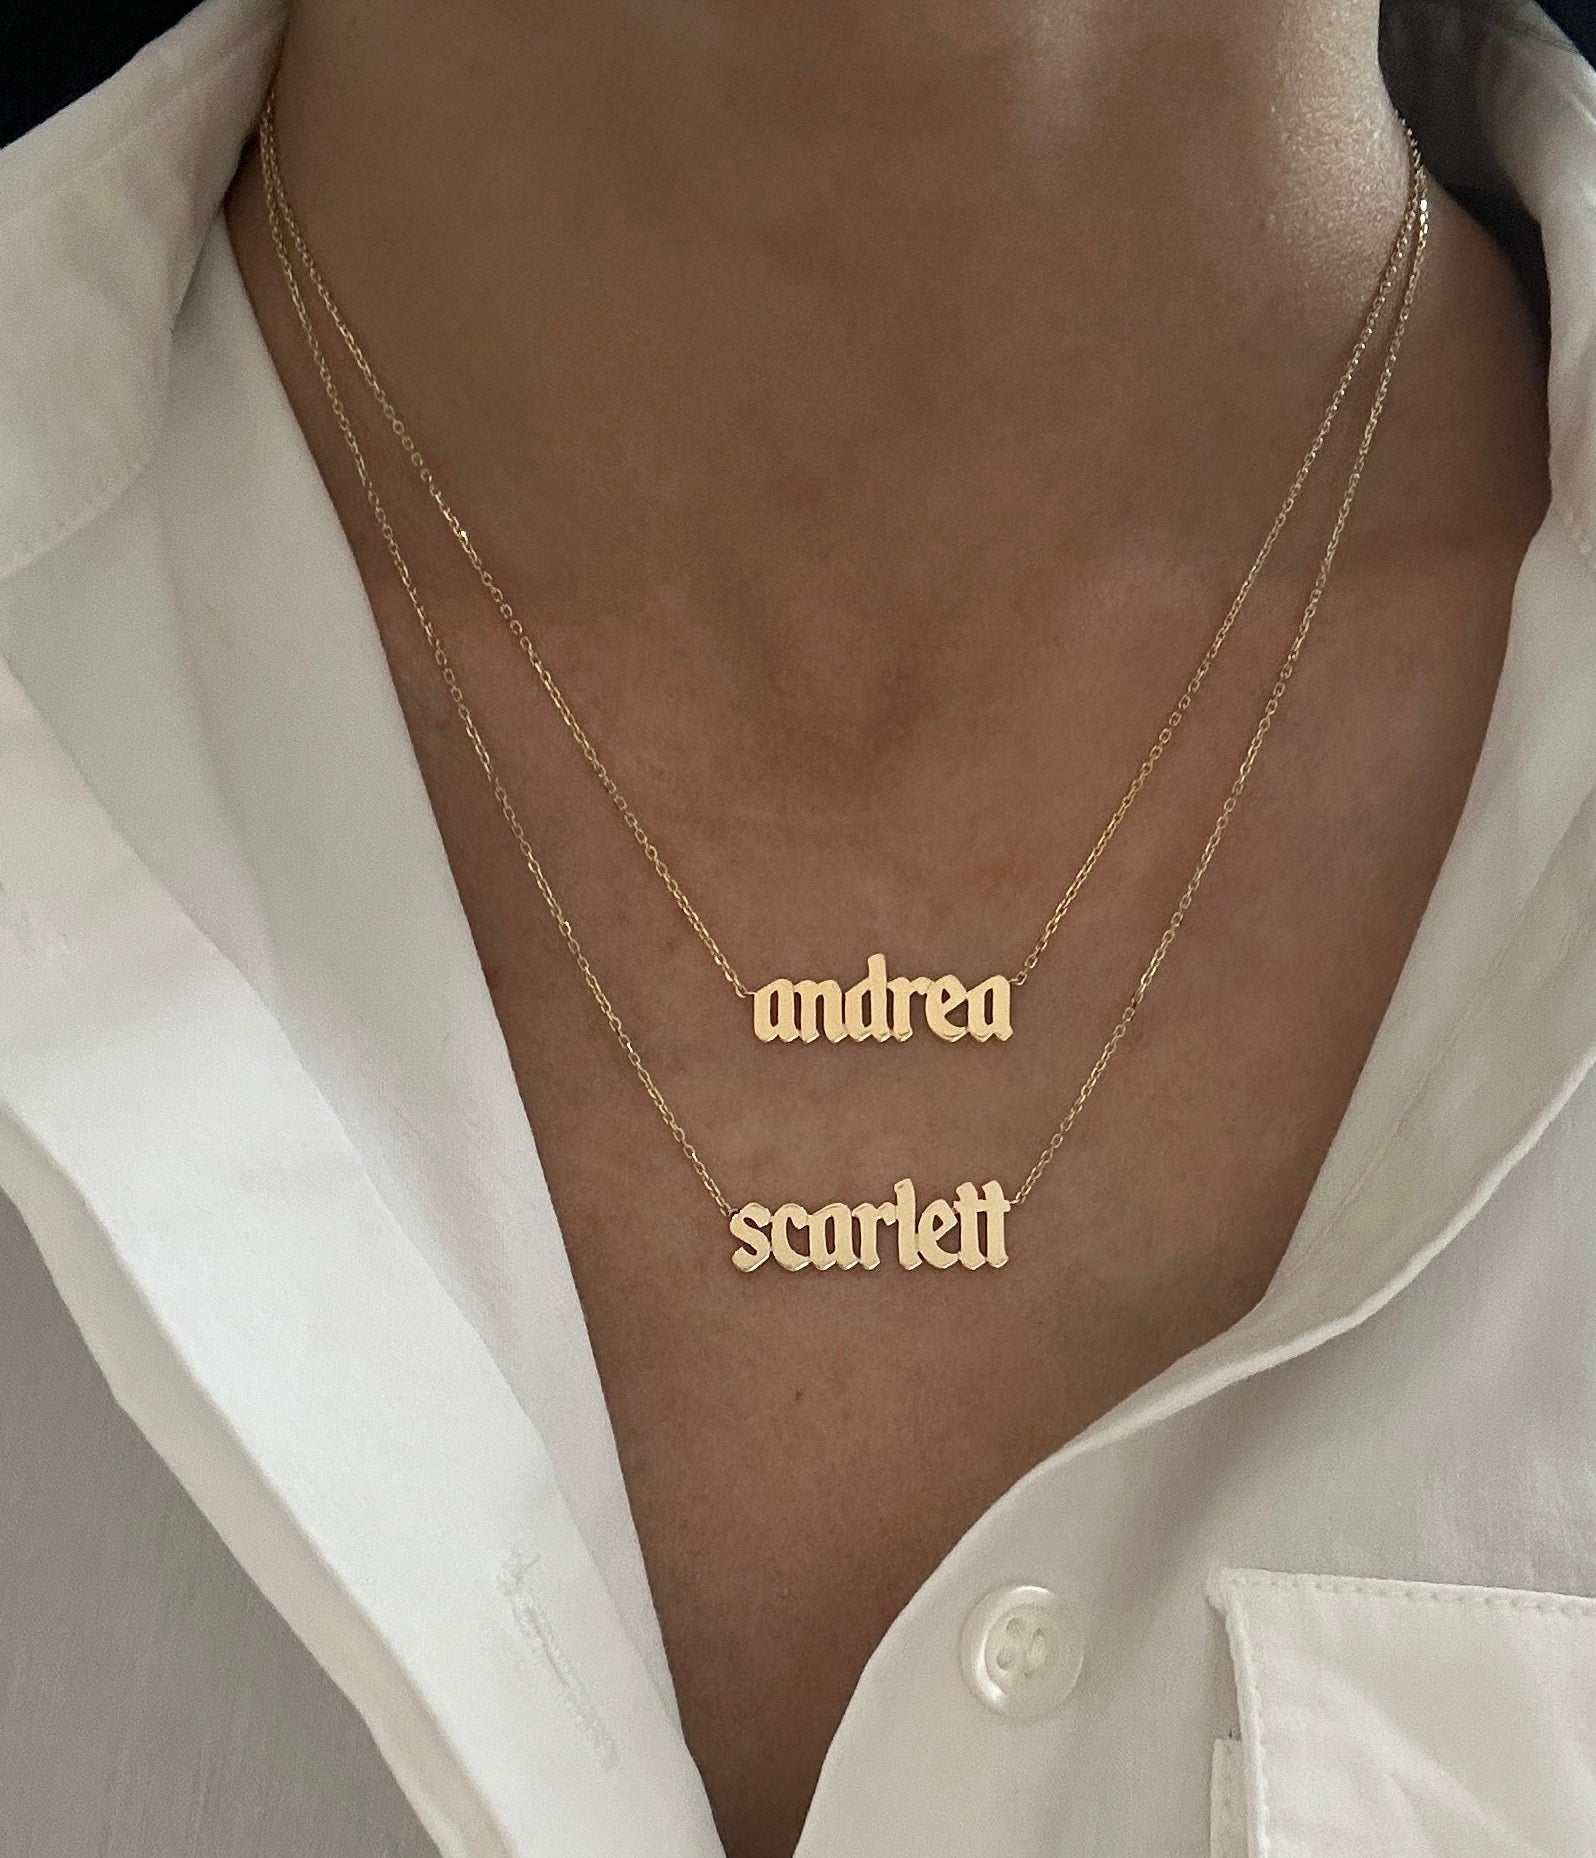 Modern Gothic Name Necklace